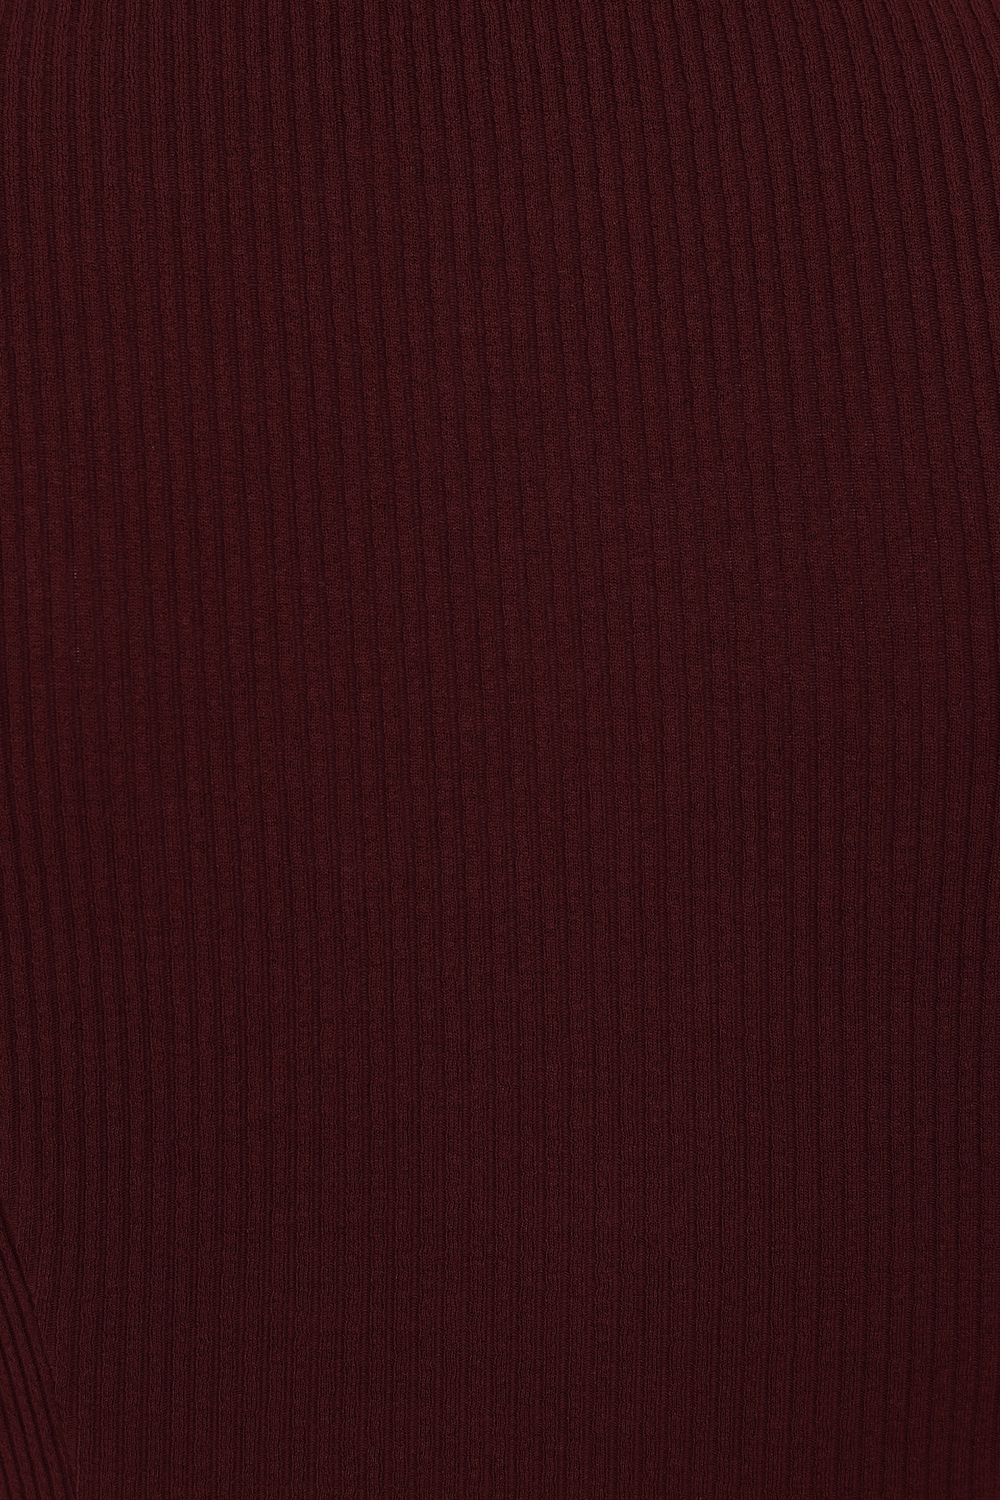 Susan Knitted Top in Burgundy